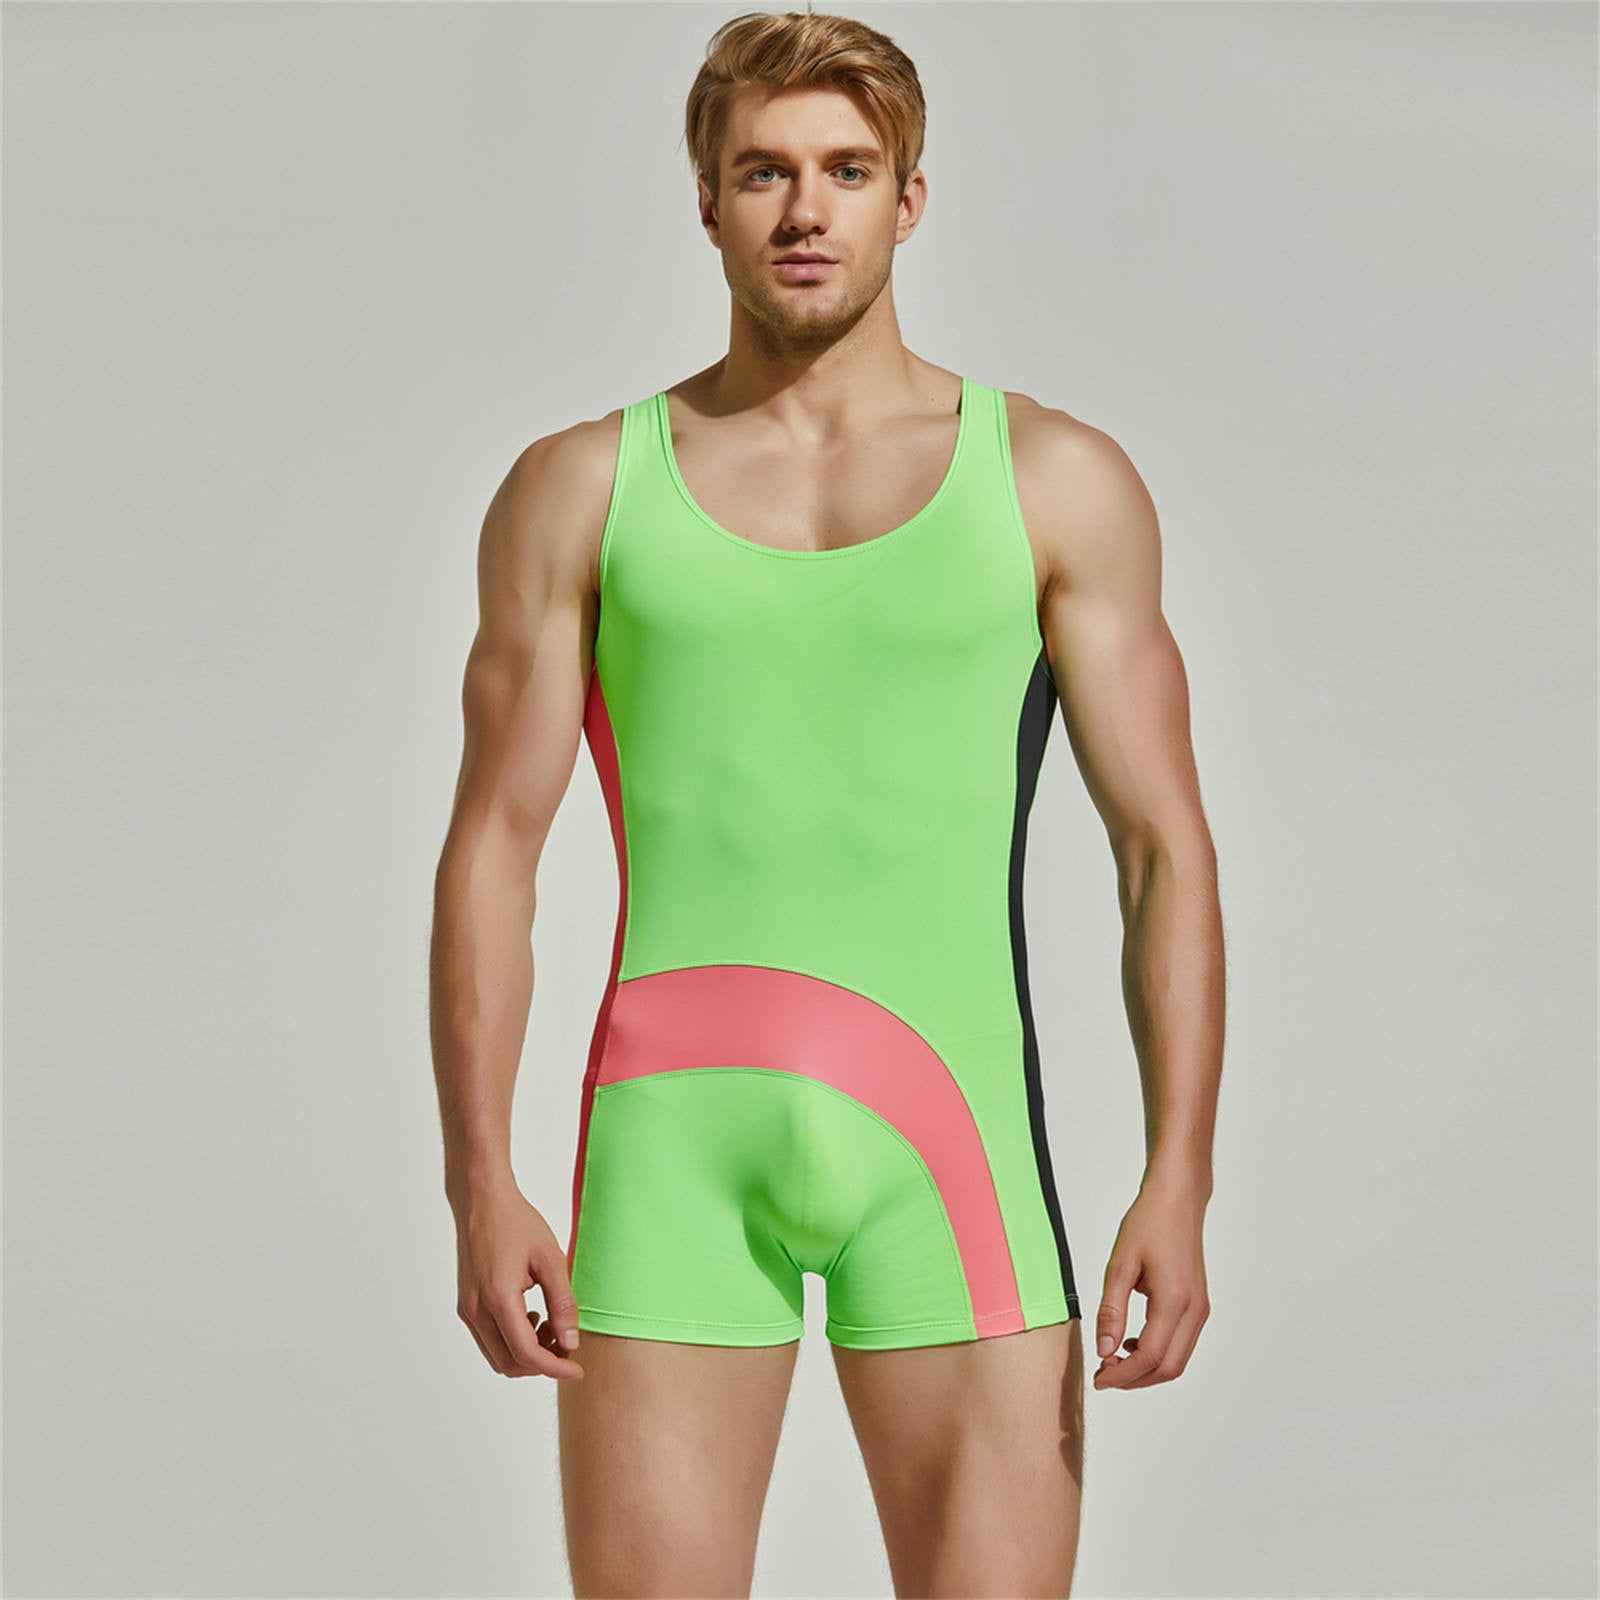 Sodopo Mens Swimsuit Male One Piece Swimwear for Men and Boys